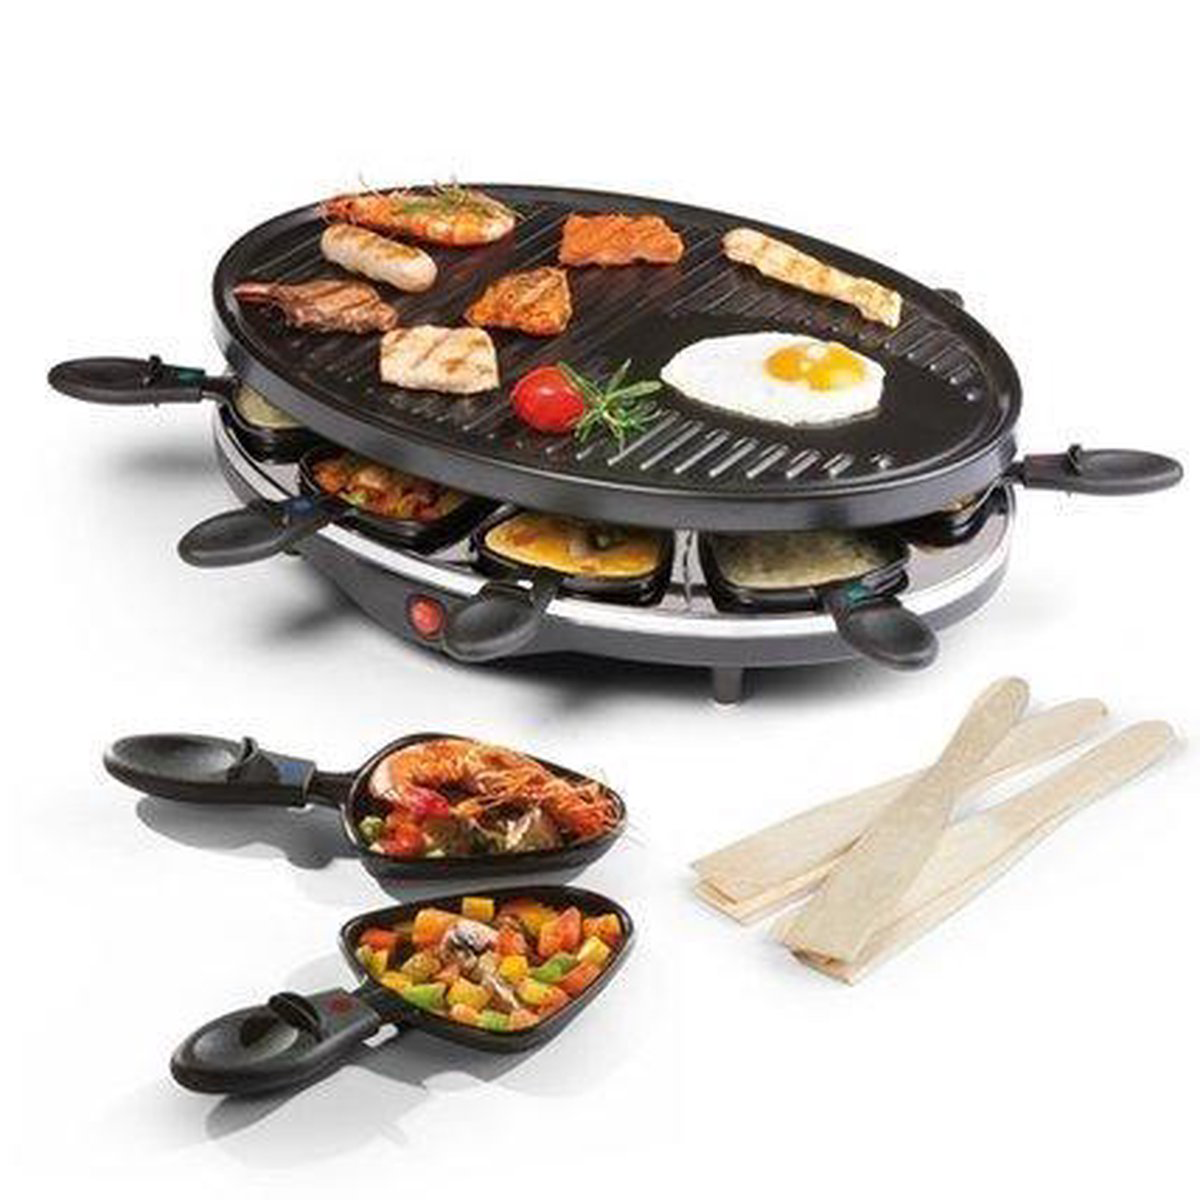 Domo DO9038G Gourmet Box - Raclette grill